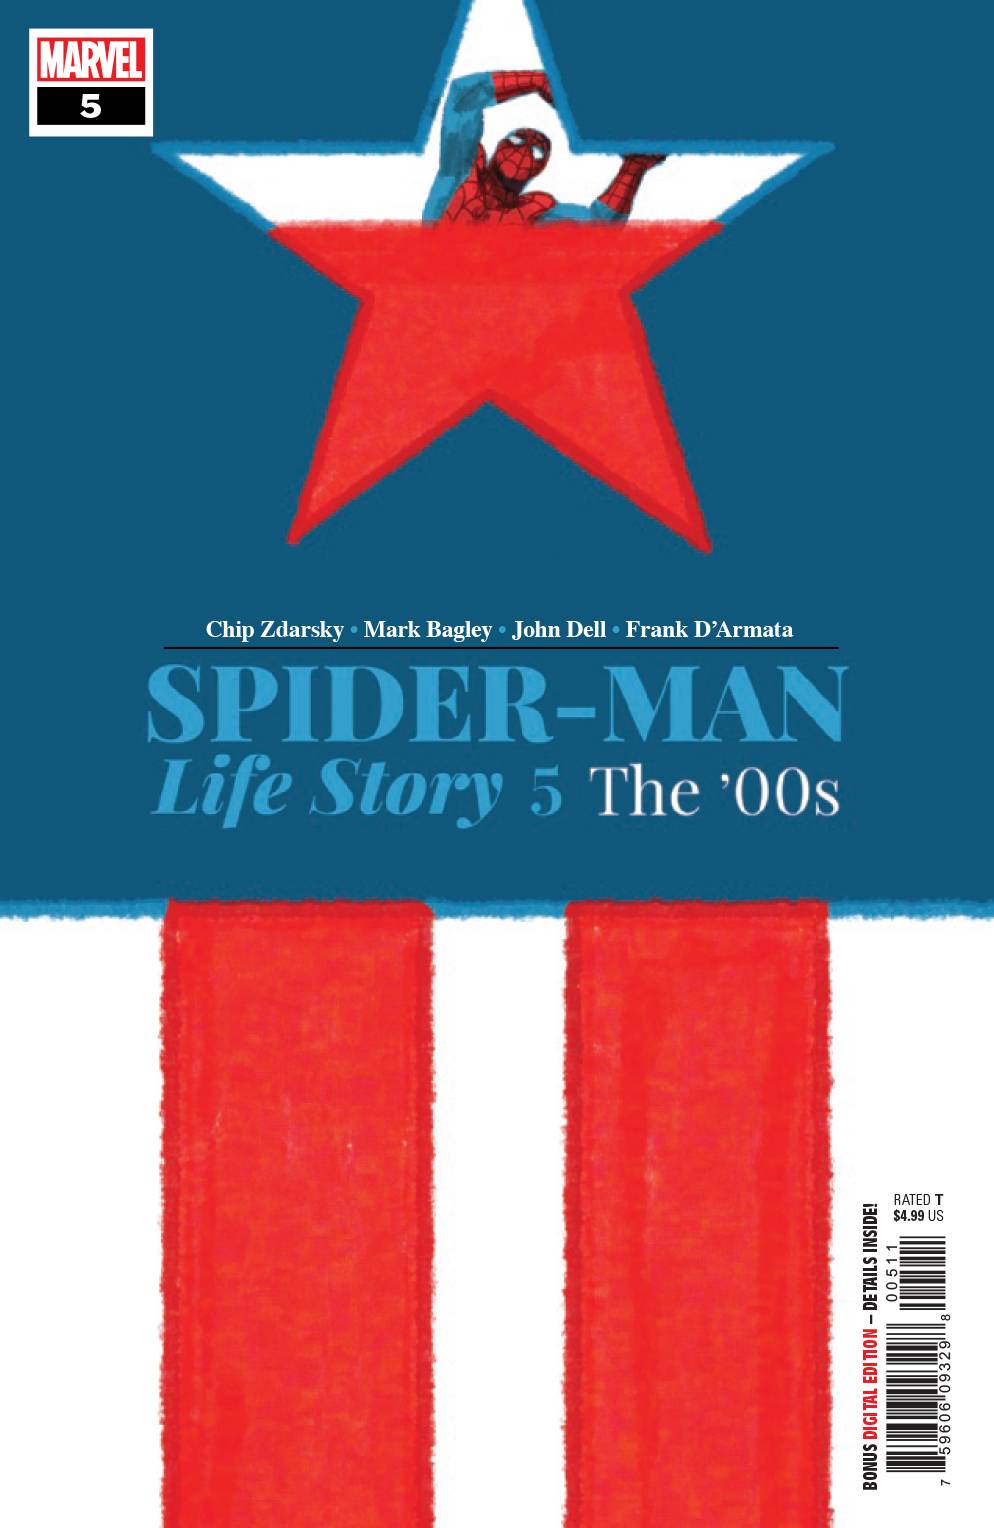 SPIDER-MAN LIFE STORY #5 (OF 6)